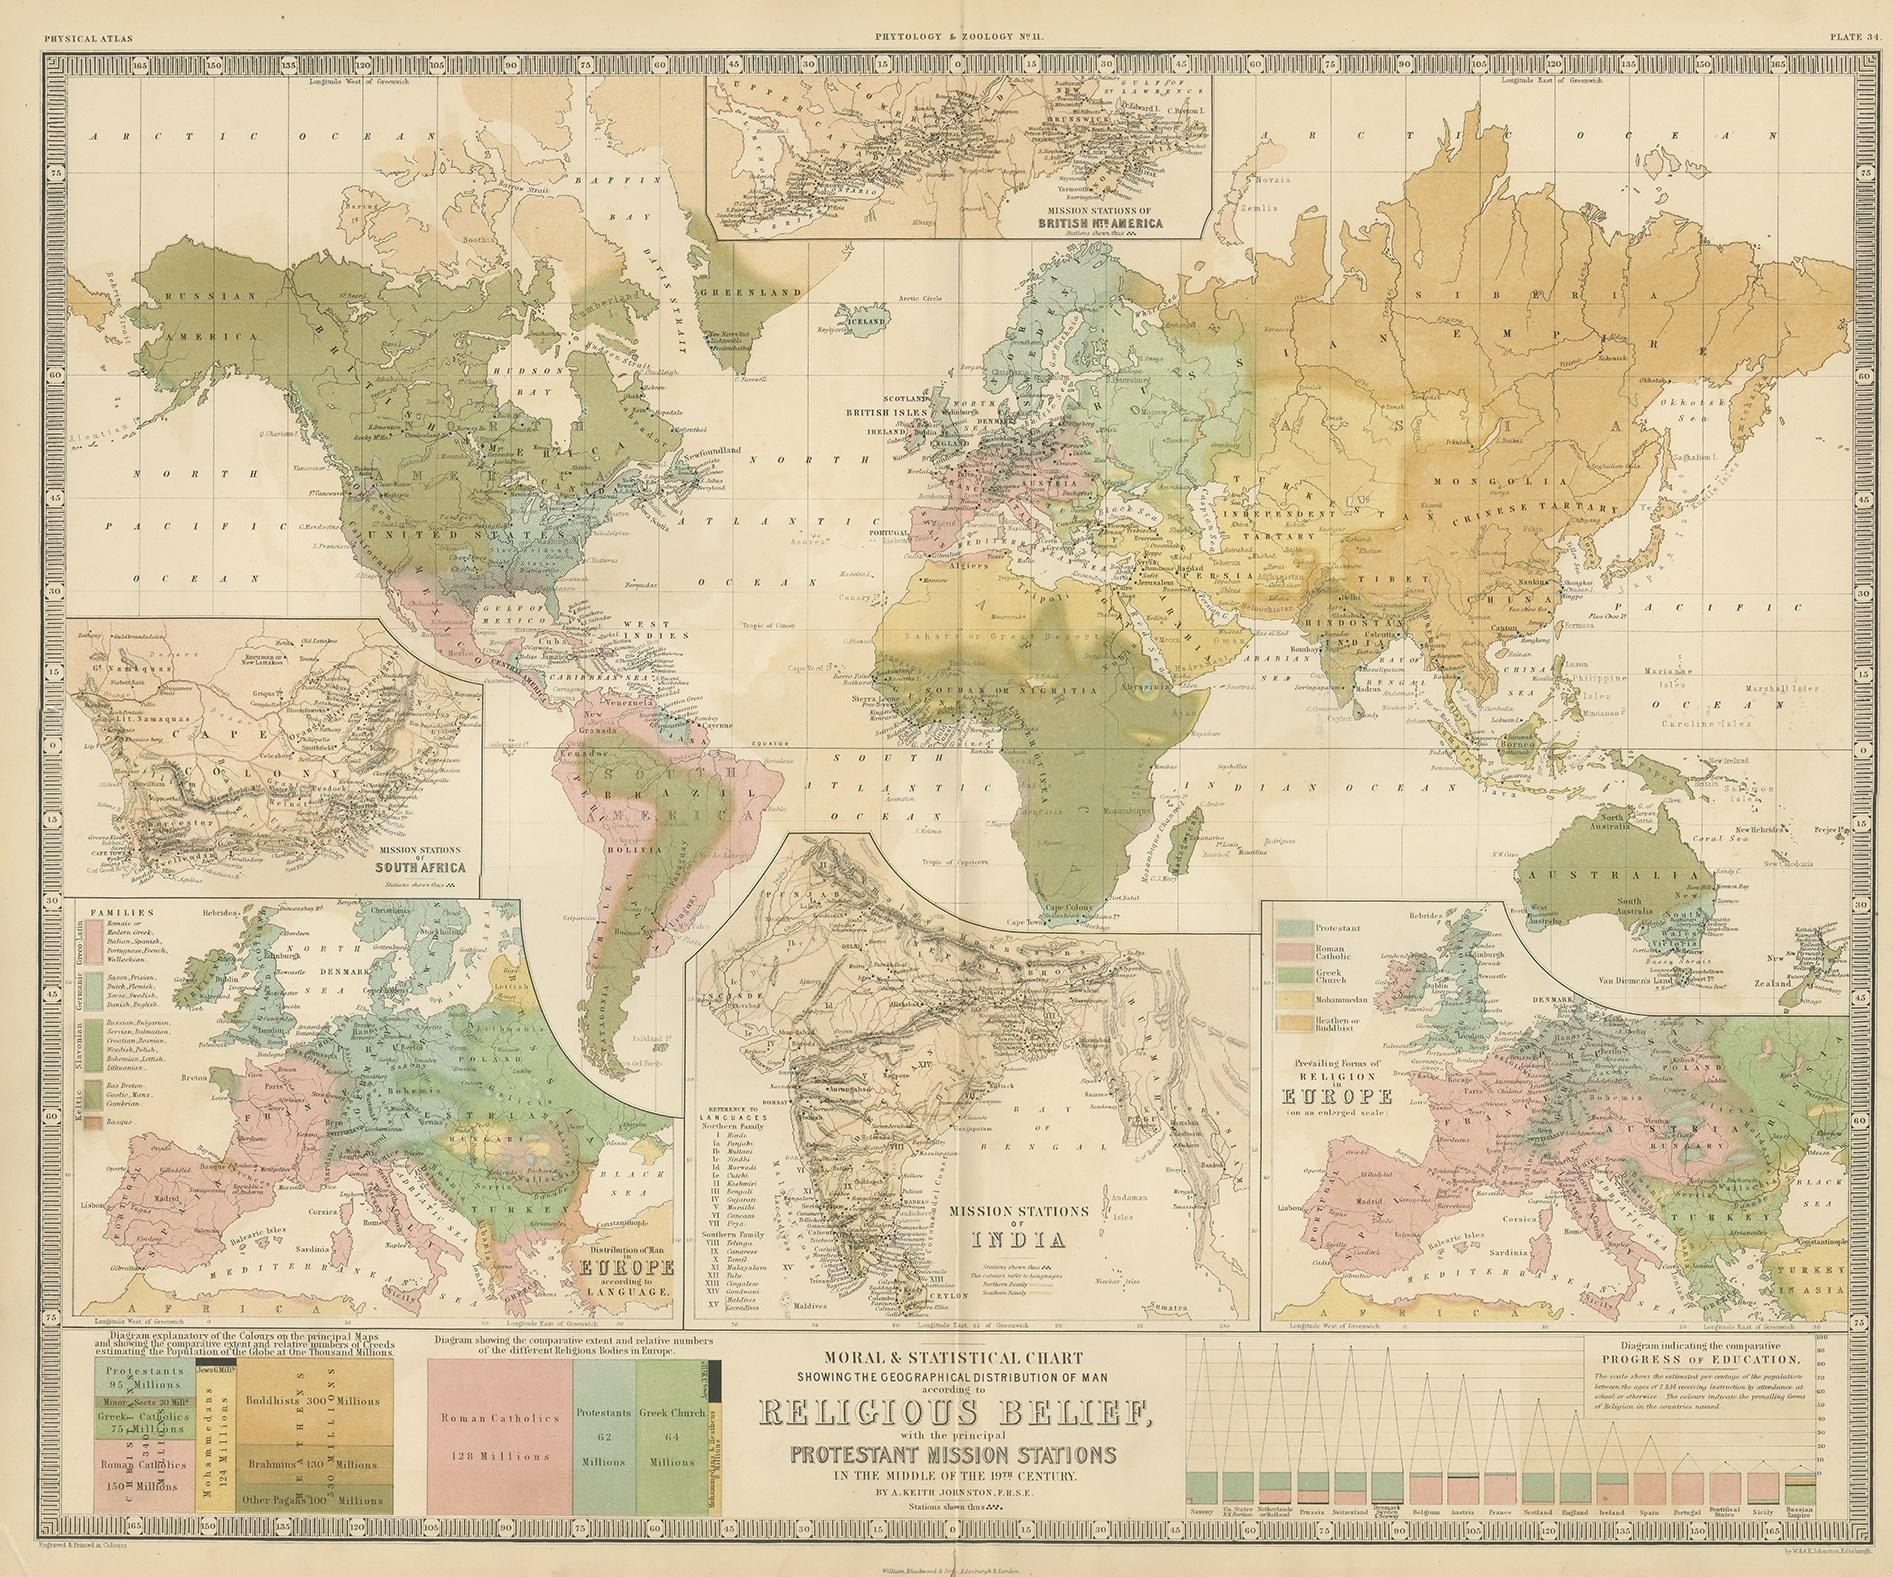 Antique map titled 'Moral & Statistical Chart showing the Geographical Distribution of Man According to Religious Belief'. Rare large-size thematic map on the distribution of religions around the world, shown with different colours and diagrams.